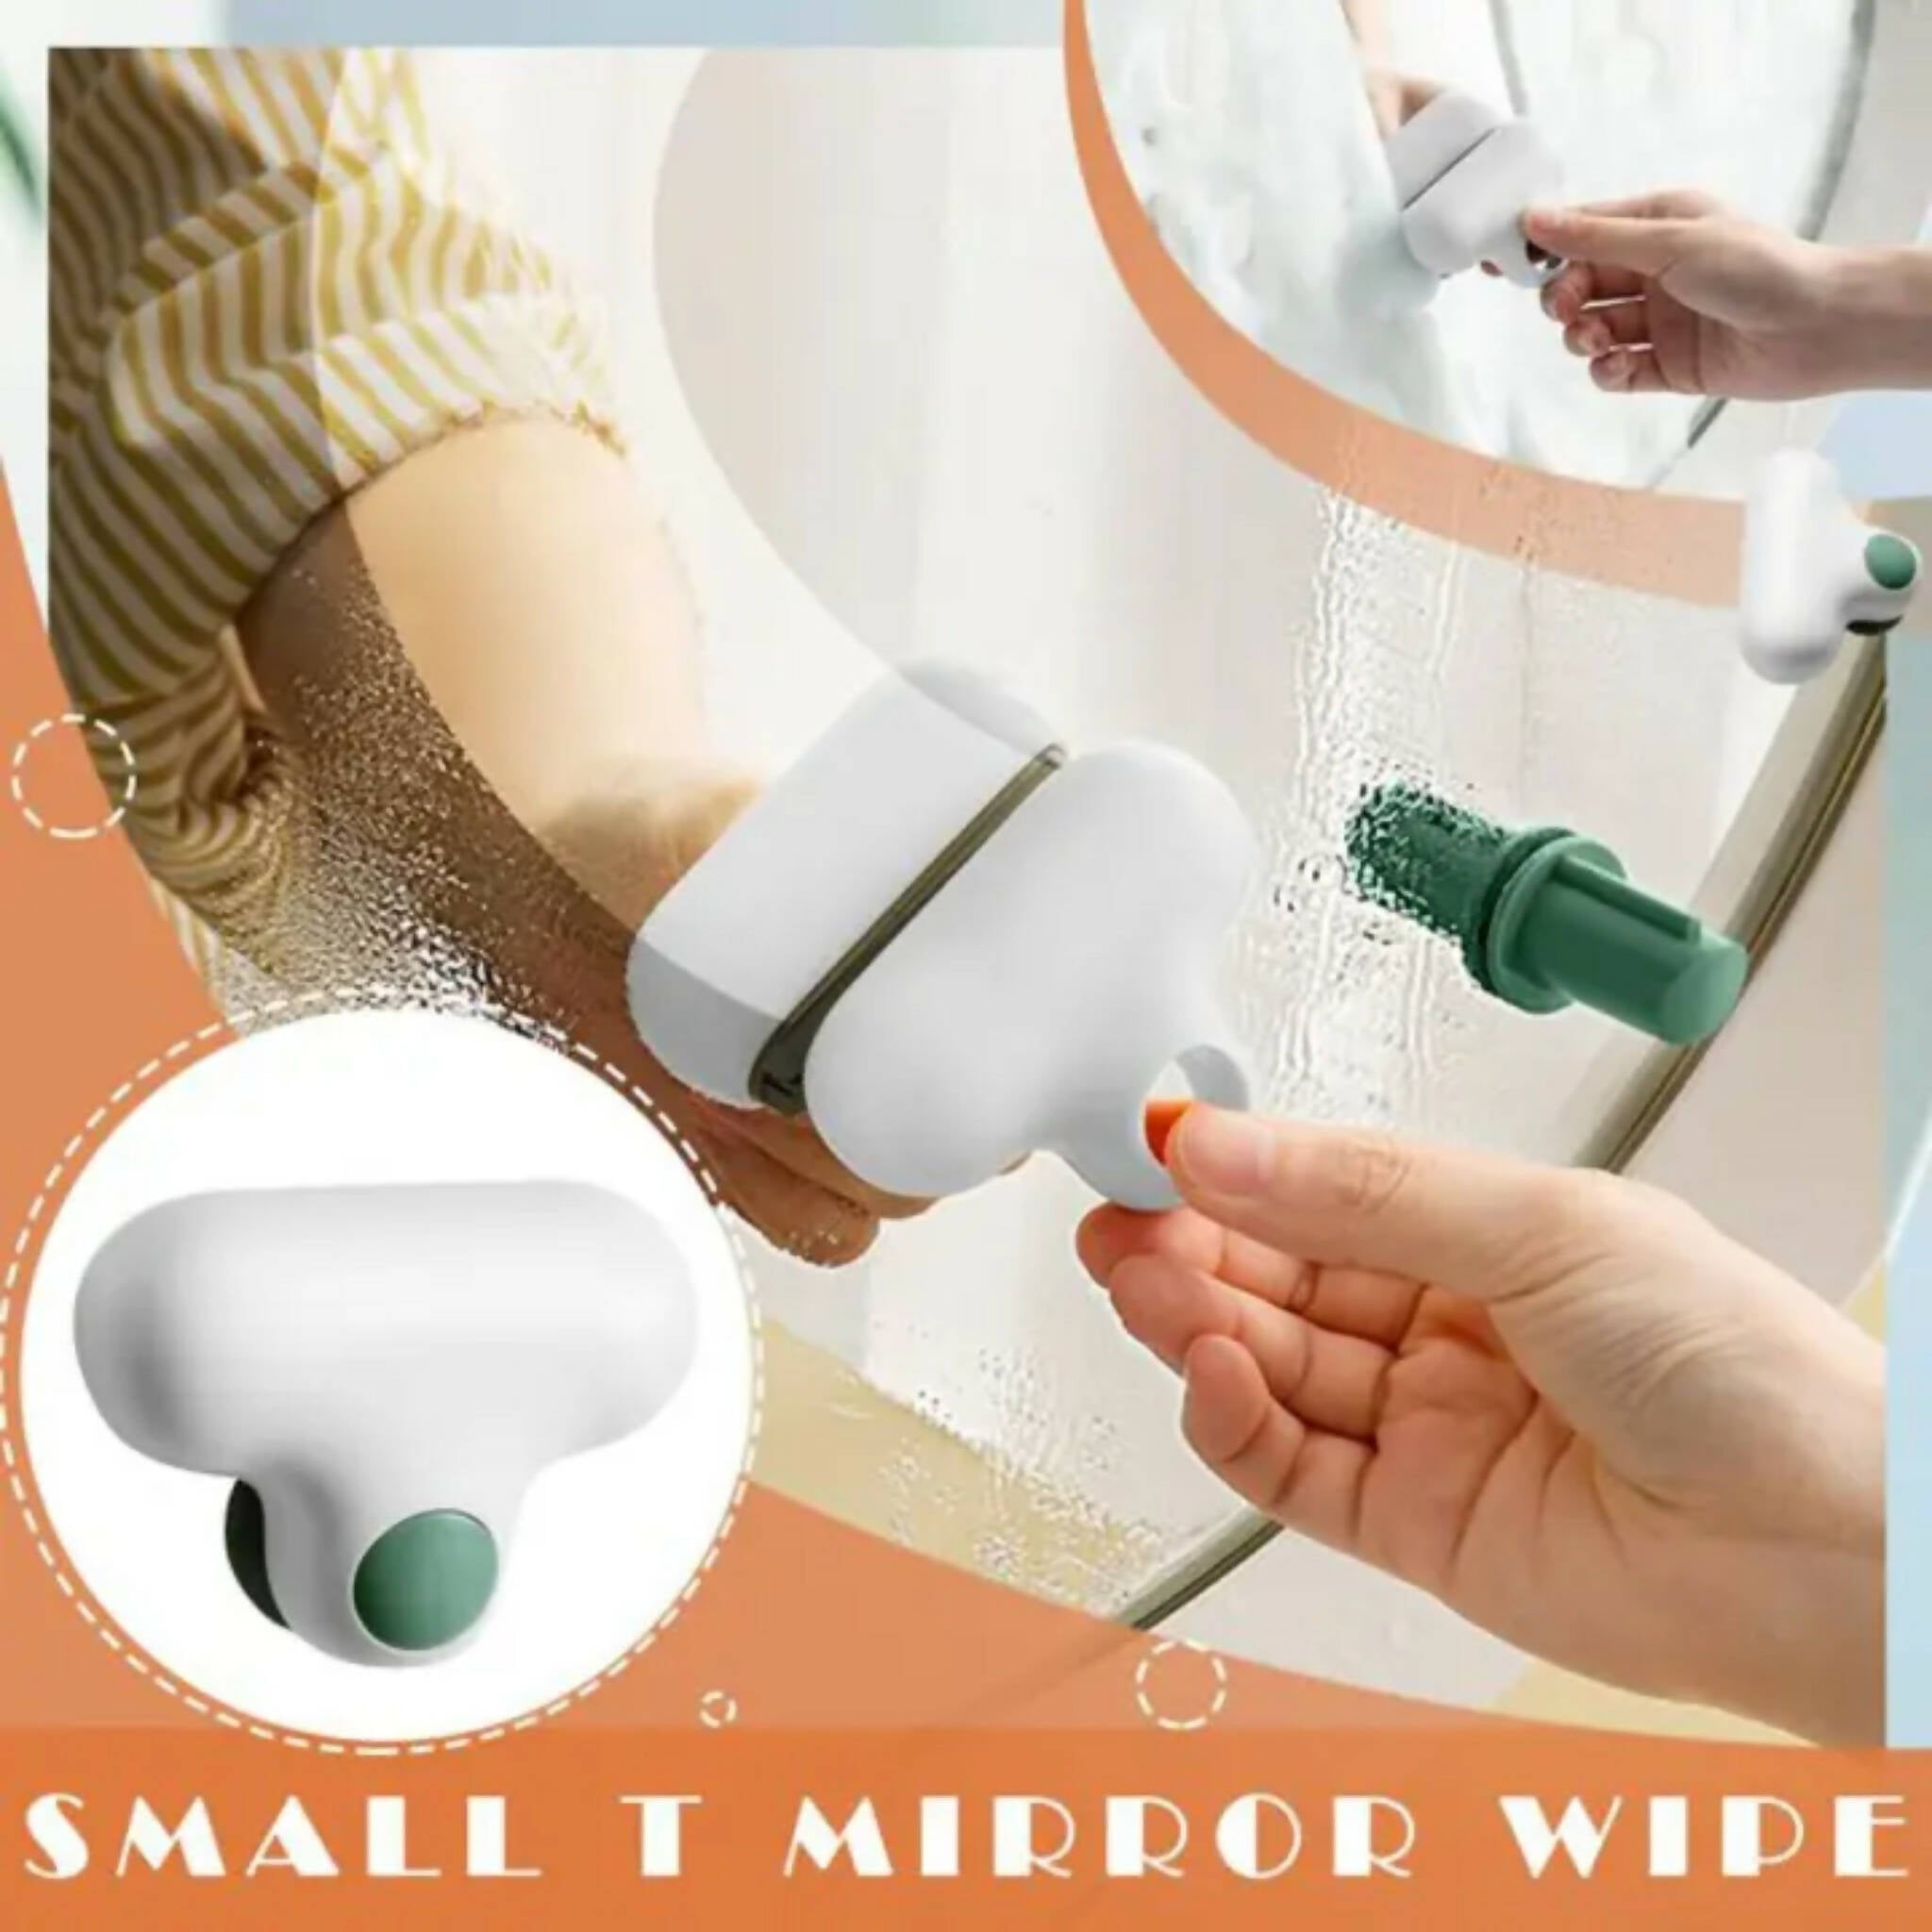 Mirror Wiper, Efficiently Clean & Descale - Two-In-One Glass Cleaner